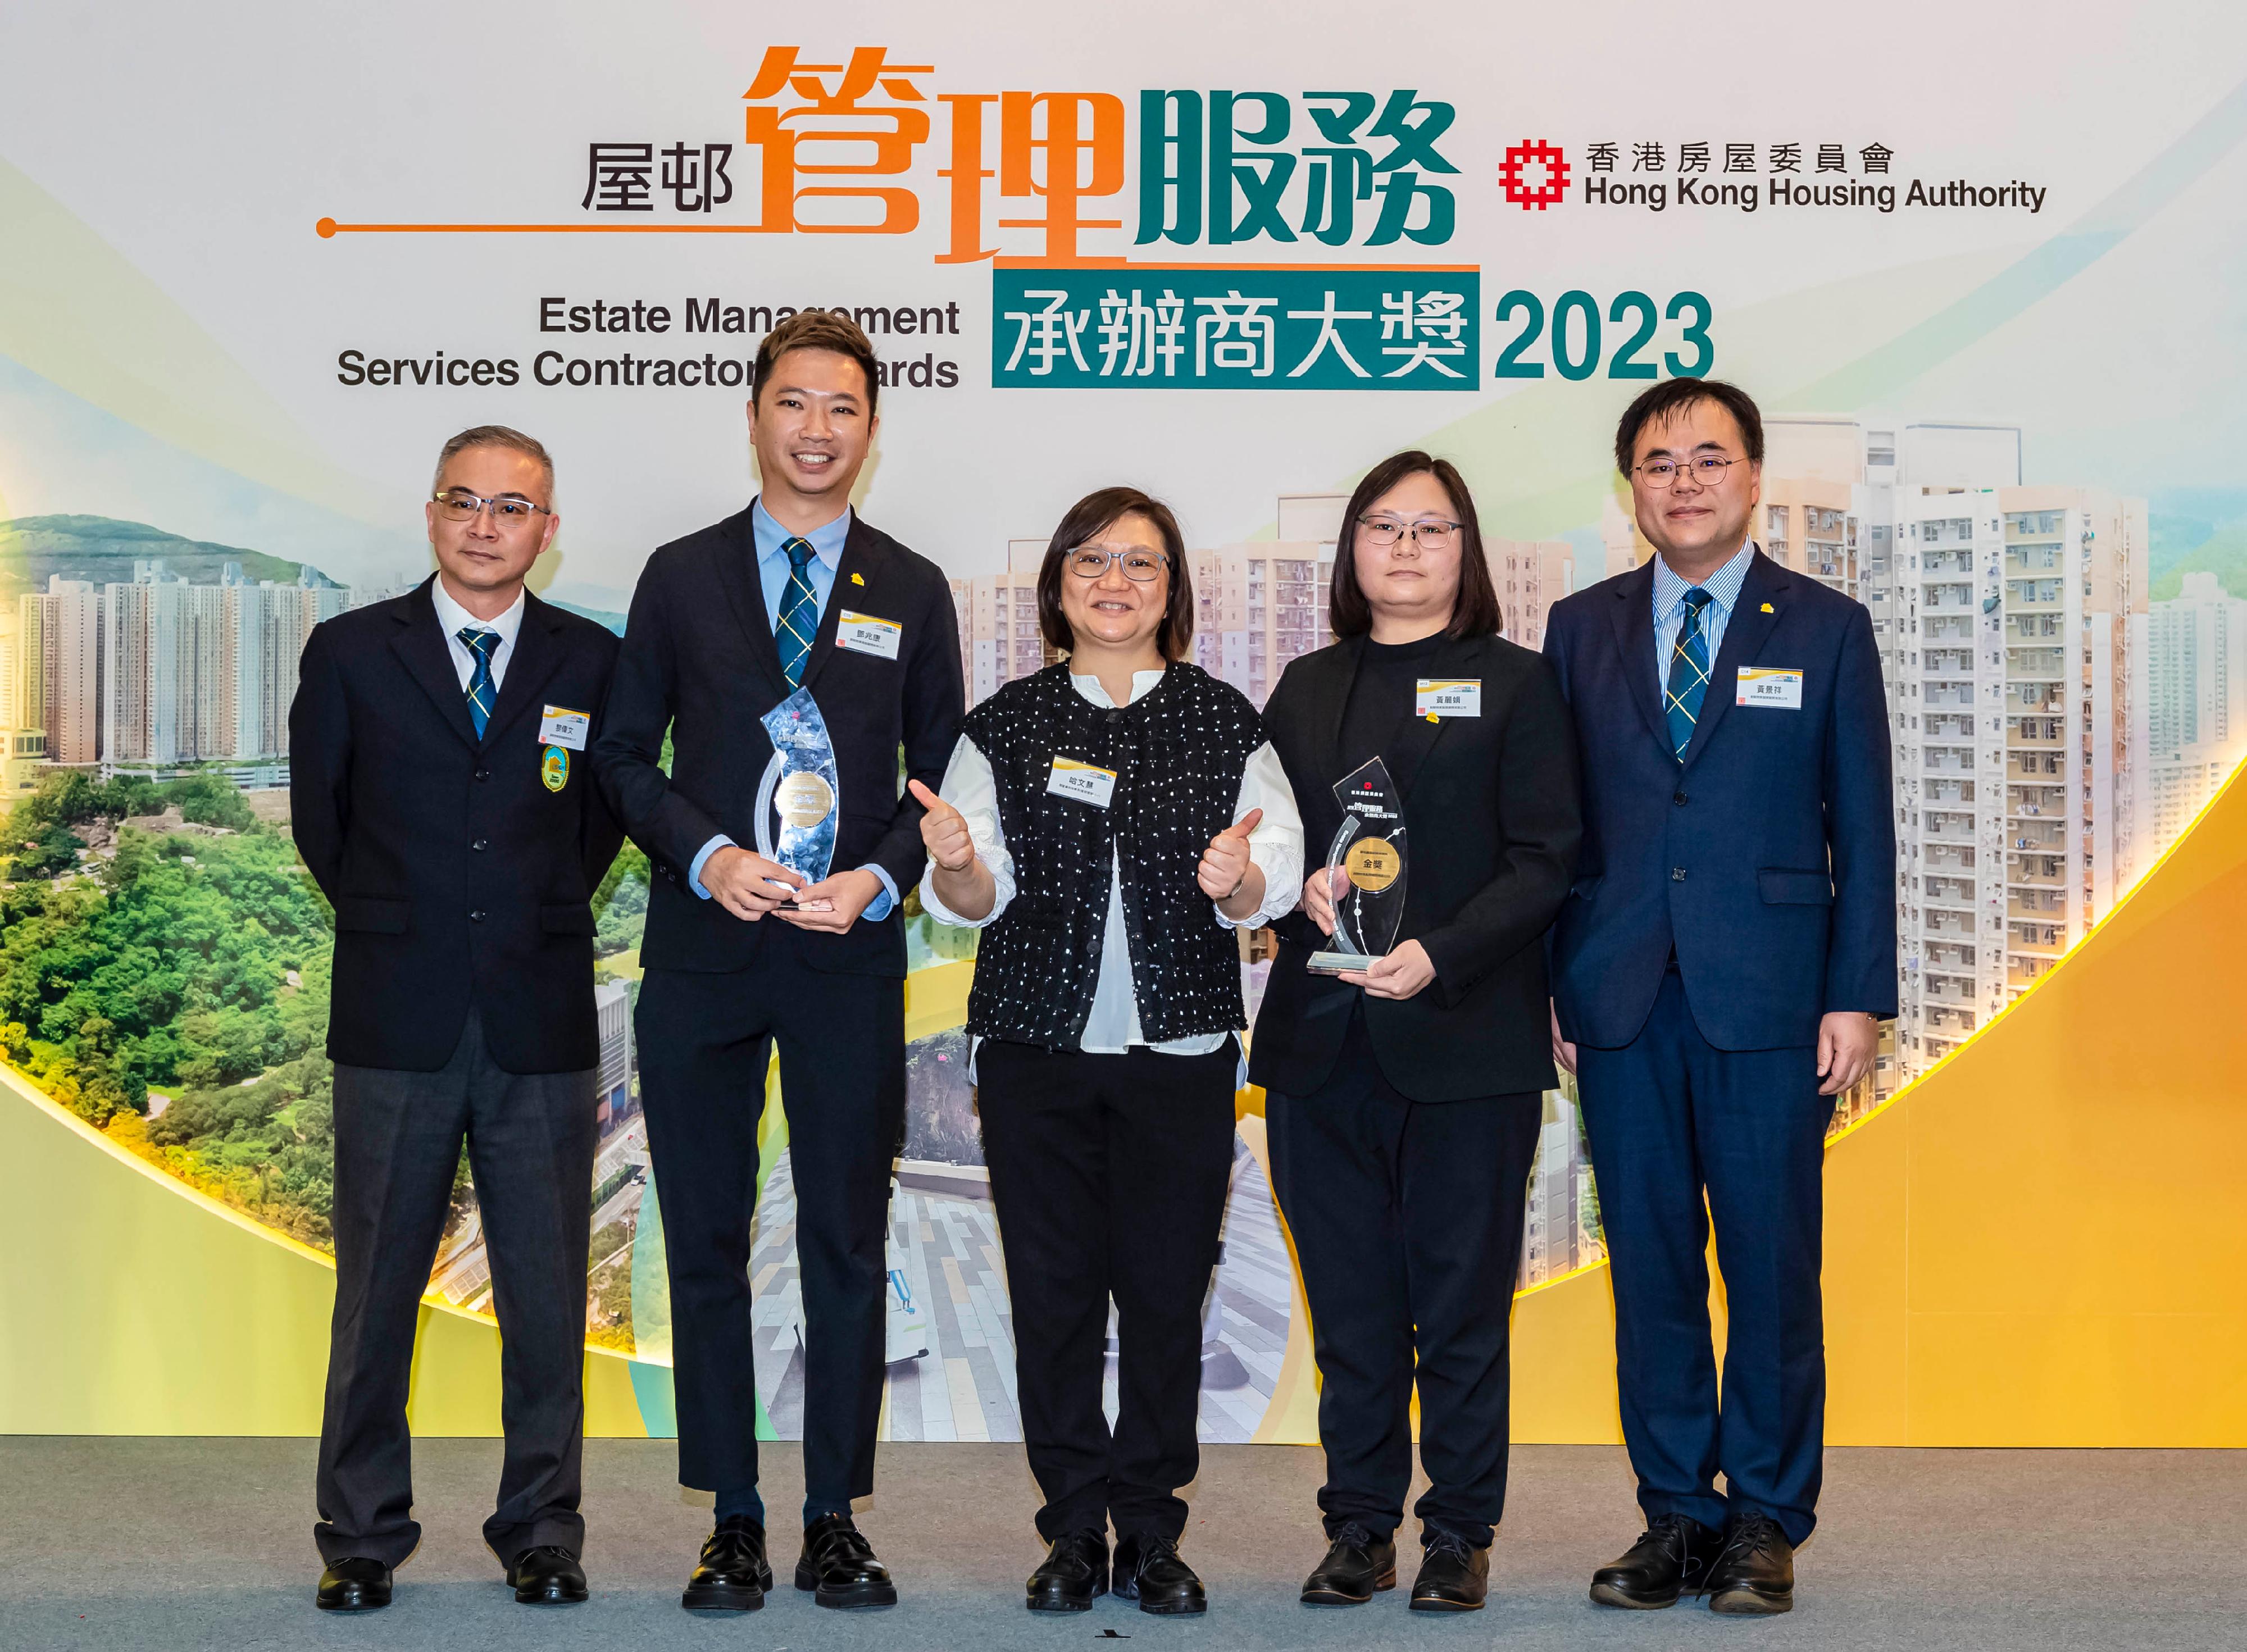 The Hong Kong Housing Authority hosted the Estate Management Services Contractors Awards 2023 presentation ceremony at Domain in Yau Tong today (March 27). Photo shows the Assistant Director of Housing (Estate Management)(1), Ms Hamidah Haroon (centre), with representatives of the winner of the Gold Awards of Best Cleansing Service Contractor and Best Security Service Contractor.